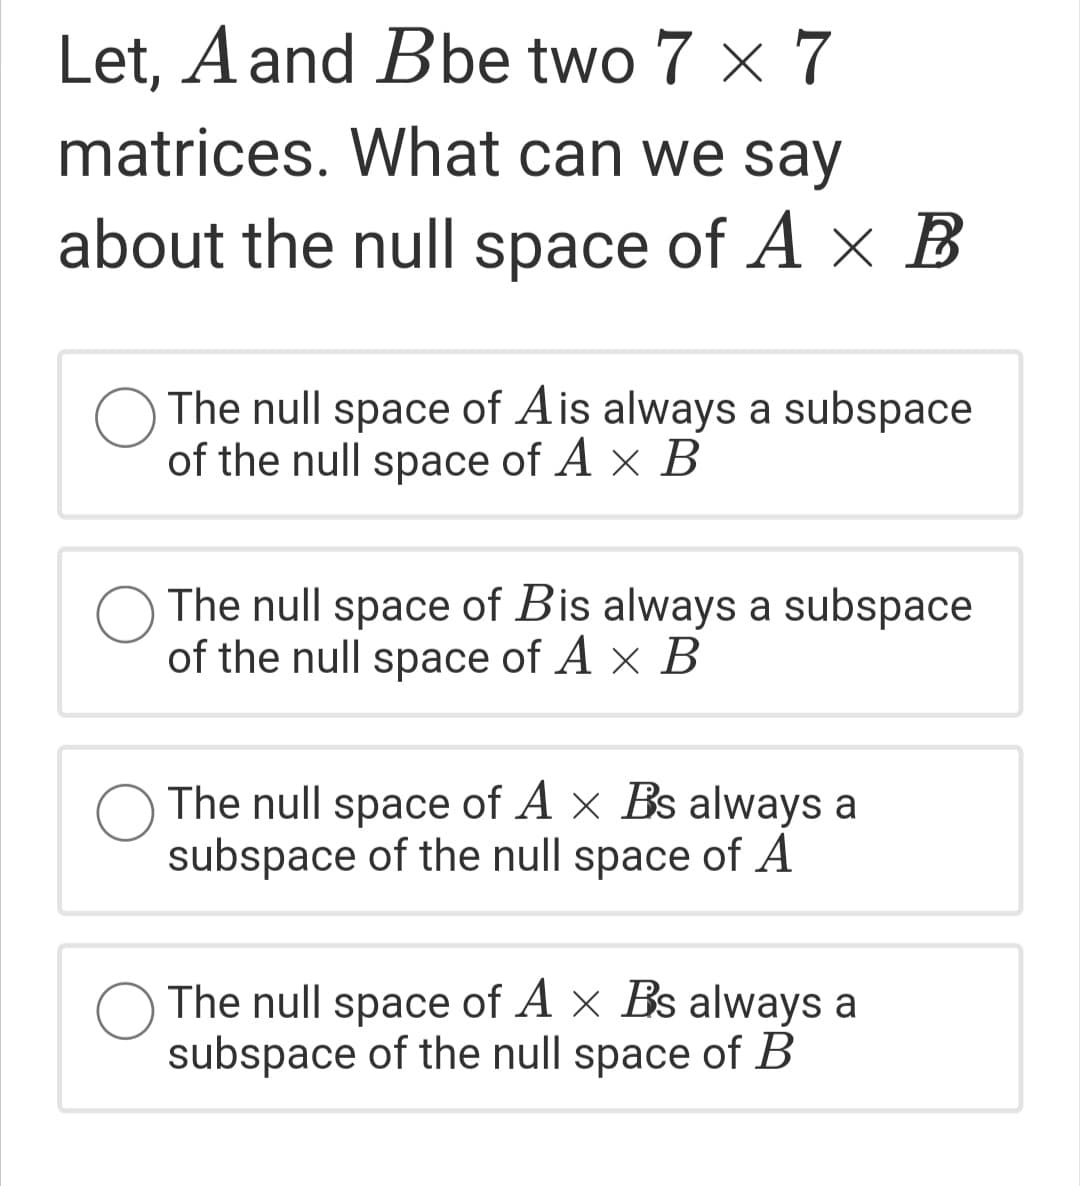 Let, A and Bbe two 7 x 7
matrices. What can we say
about the null space of A x B
The null space of Ais always a subspace
of the null space of A × B
The null space of Bis always a subspace
of the null space of A × B
The null space of A x Bs always a
subspace of the null space of A
O The null space of A x Bs always a
subspace of the null space of B
